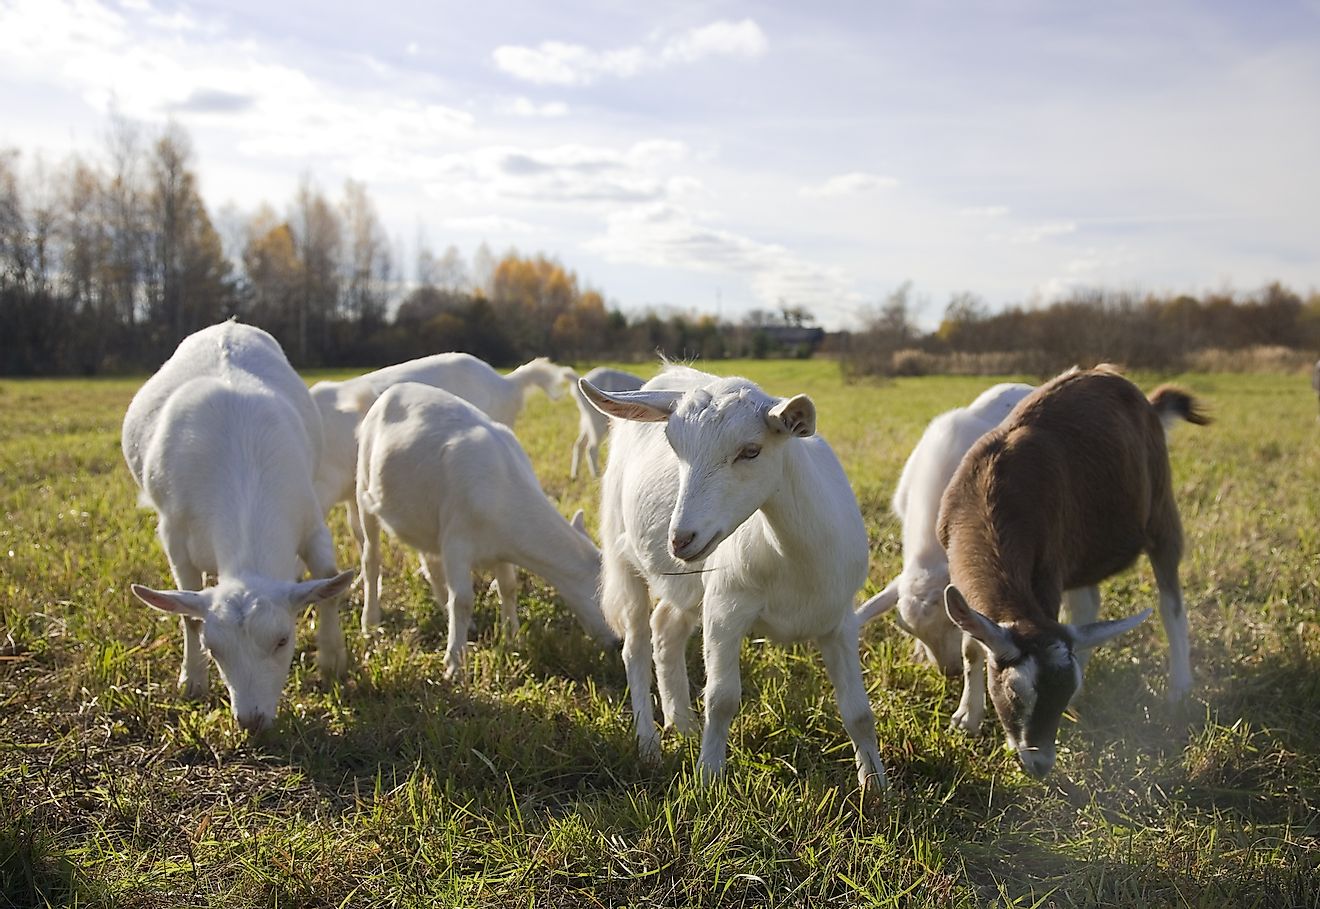 Goats were also introduced in New Zealand by Captain Cook. Image credit: Kutikan/Shutterstock.com